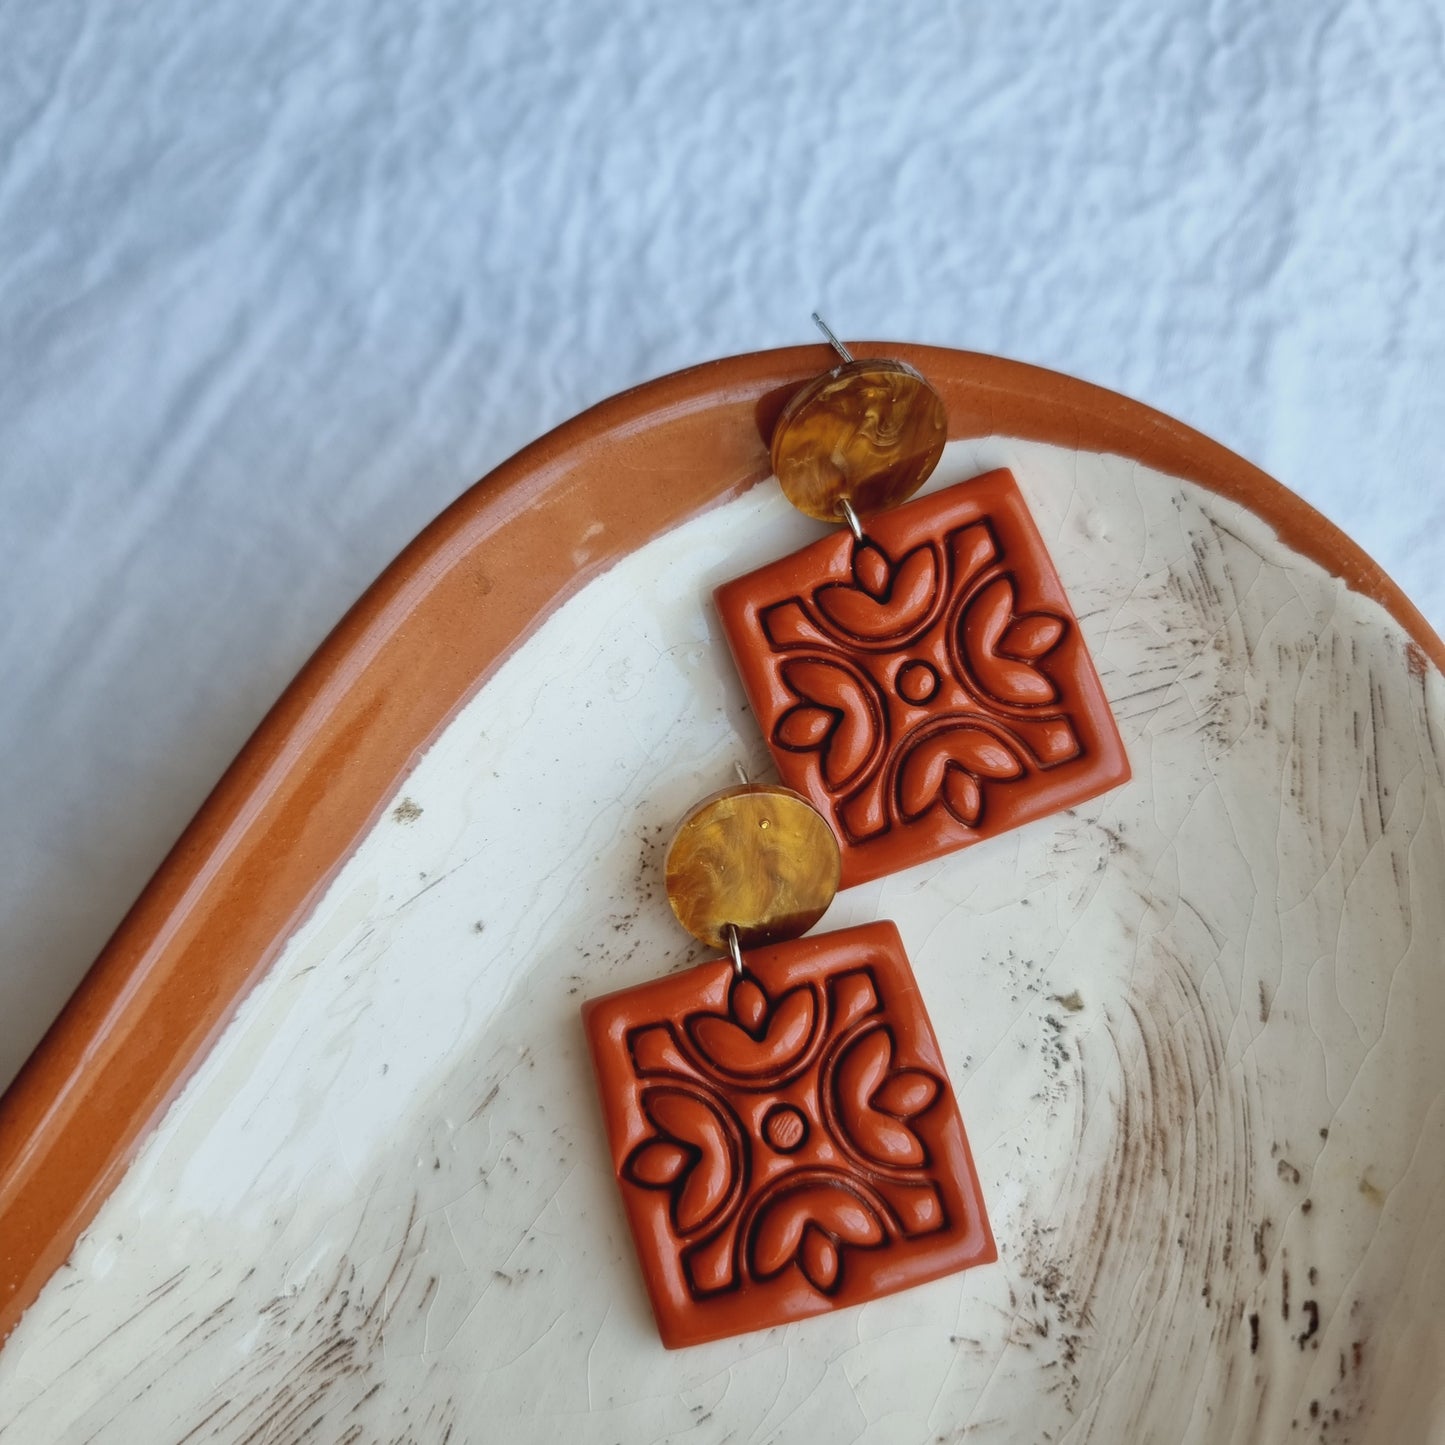 Handcrafted for a distinctive and stylish look. These eye-catching earrings feature vibrant Terracotta-colored polymer clay embossed squares